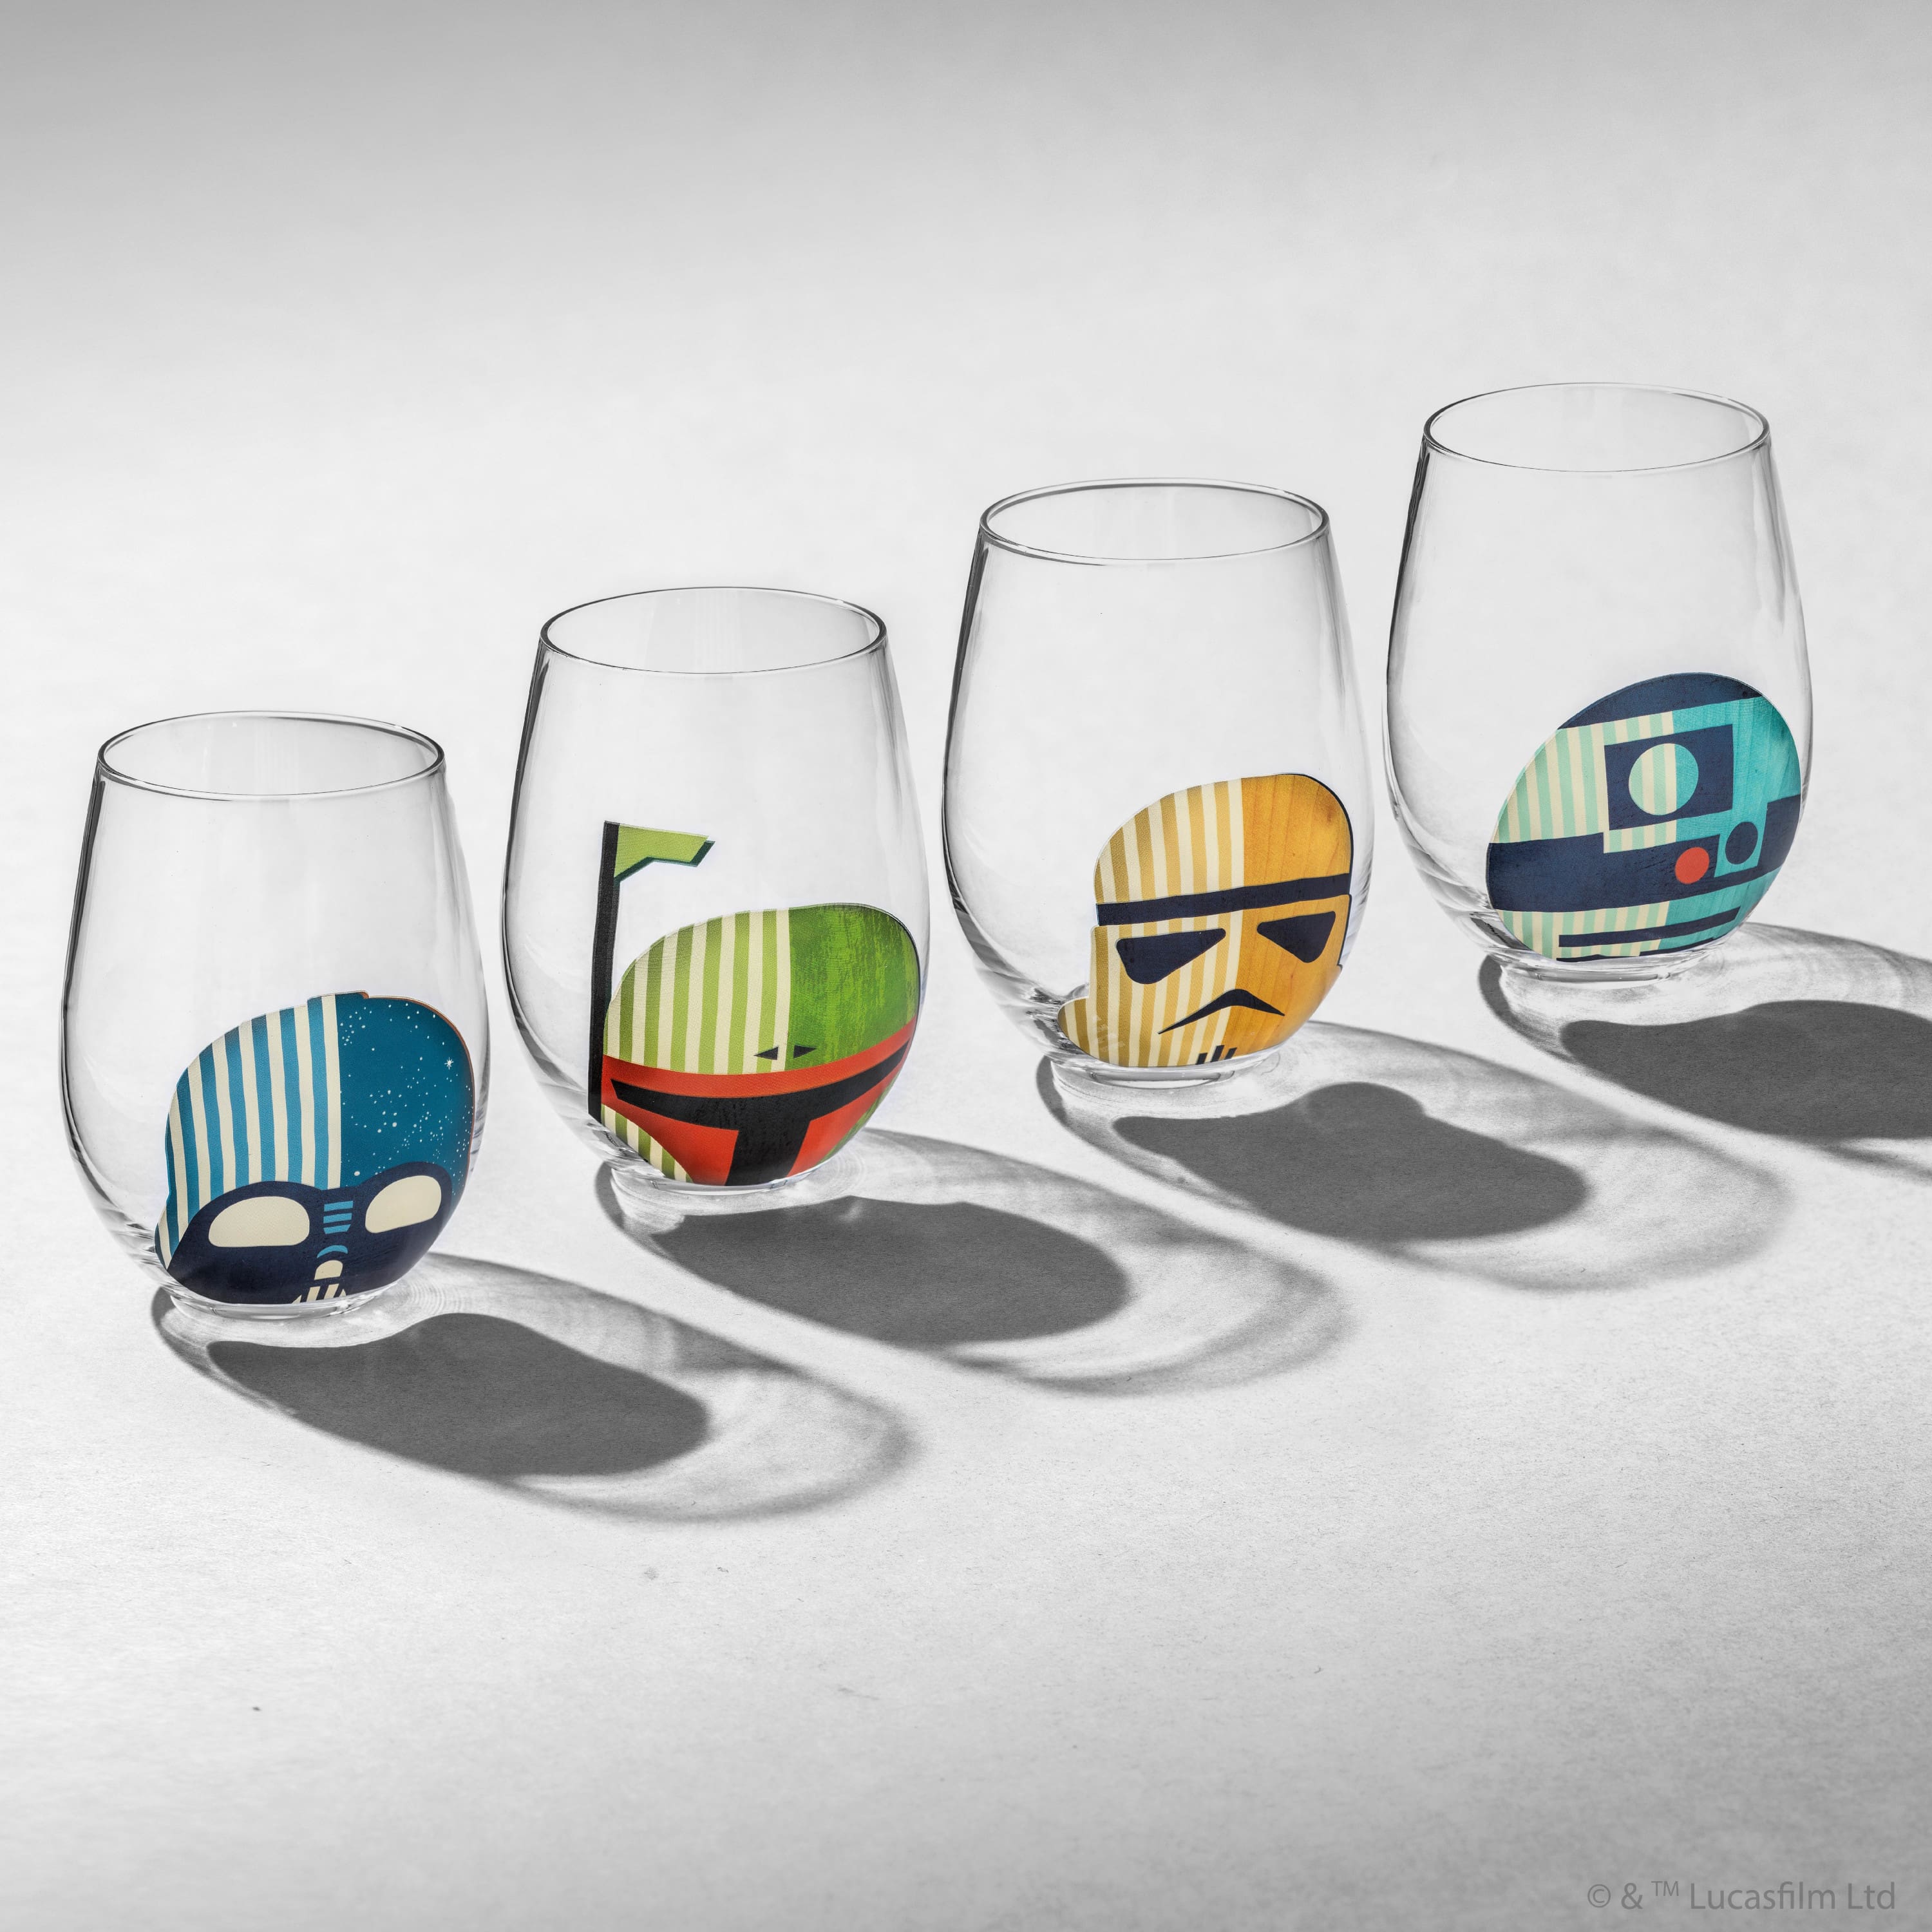 Made By Yess - Star Wars Wine Glasses